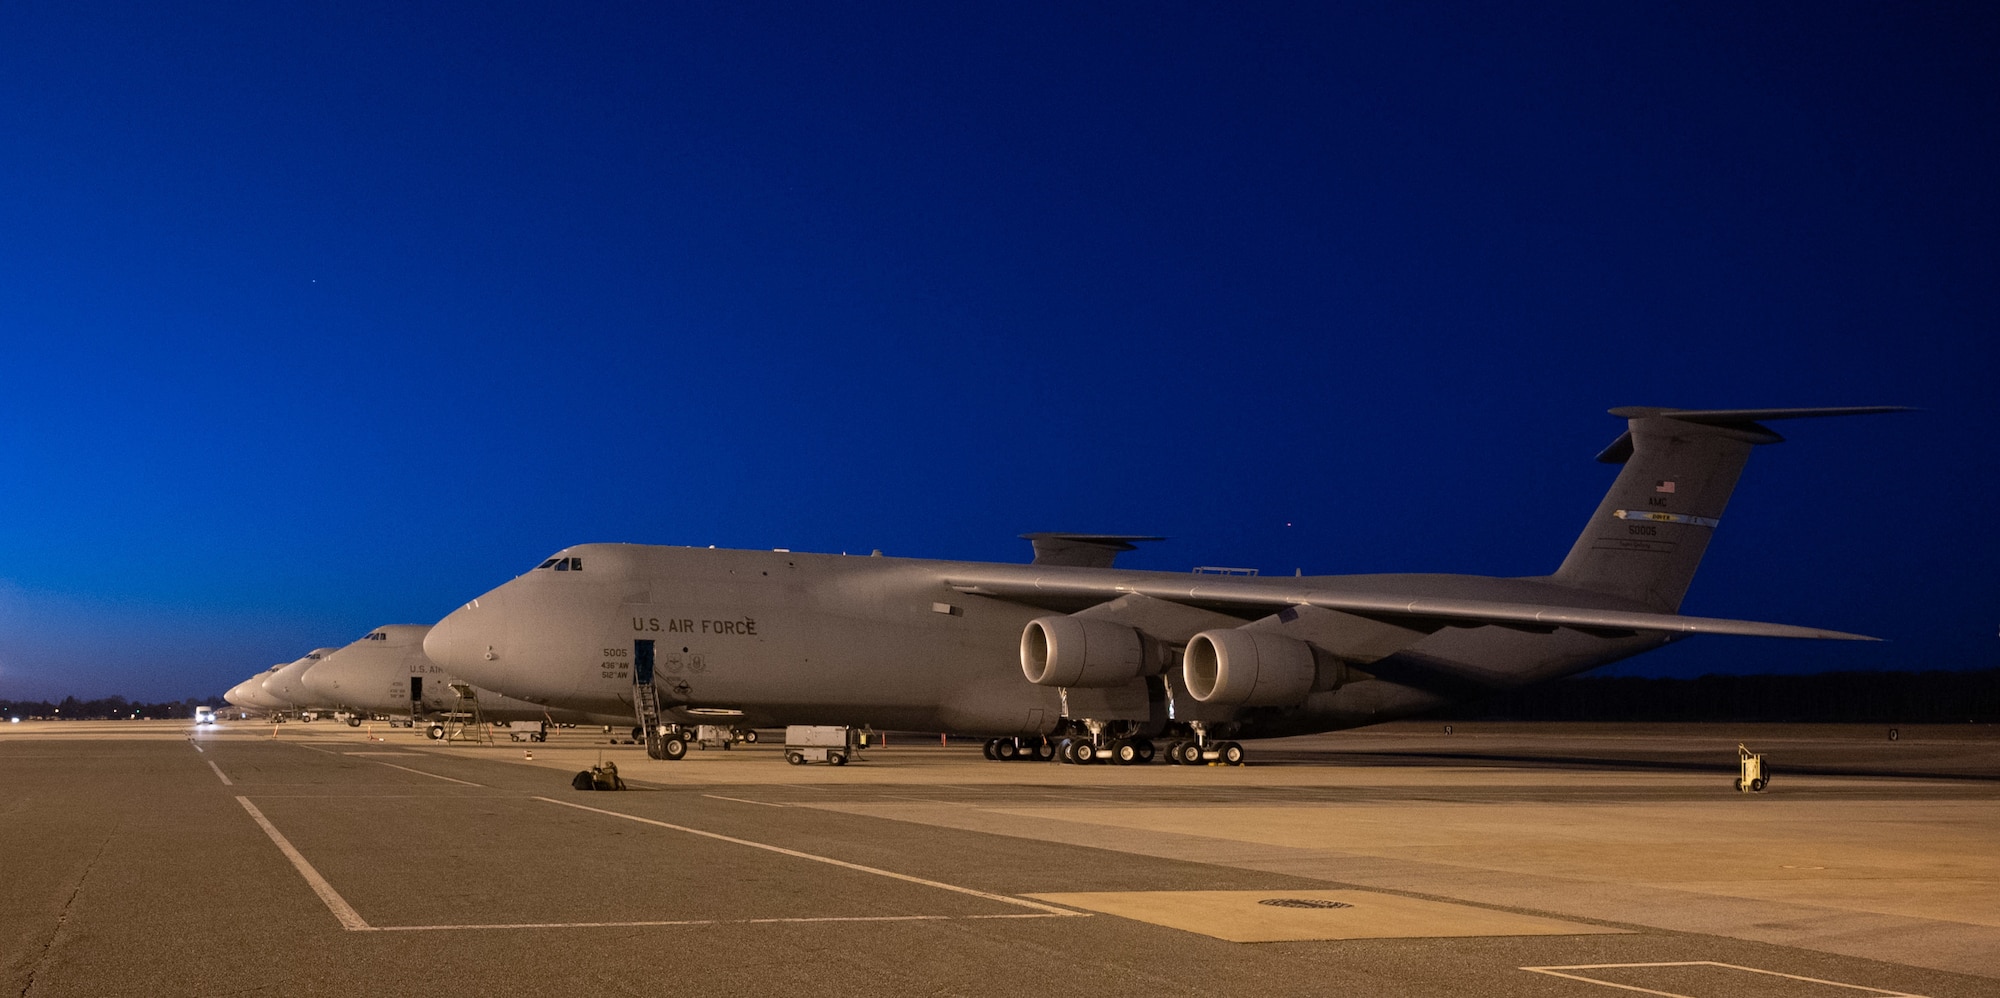 A C-5M Super Galaxy sits on the flight line in preparation for a training mission at Dover Air Force Base, Delaware, Jan. 19, 2021. Dover AFB supports 20% of the nation’s strategic airlift and routinely flies local training missions to sustain mission readiness for global operations. (U.S. Air Force photo by Airman 1st Class Faith Schaefer)